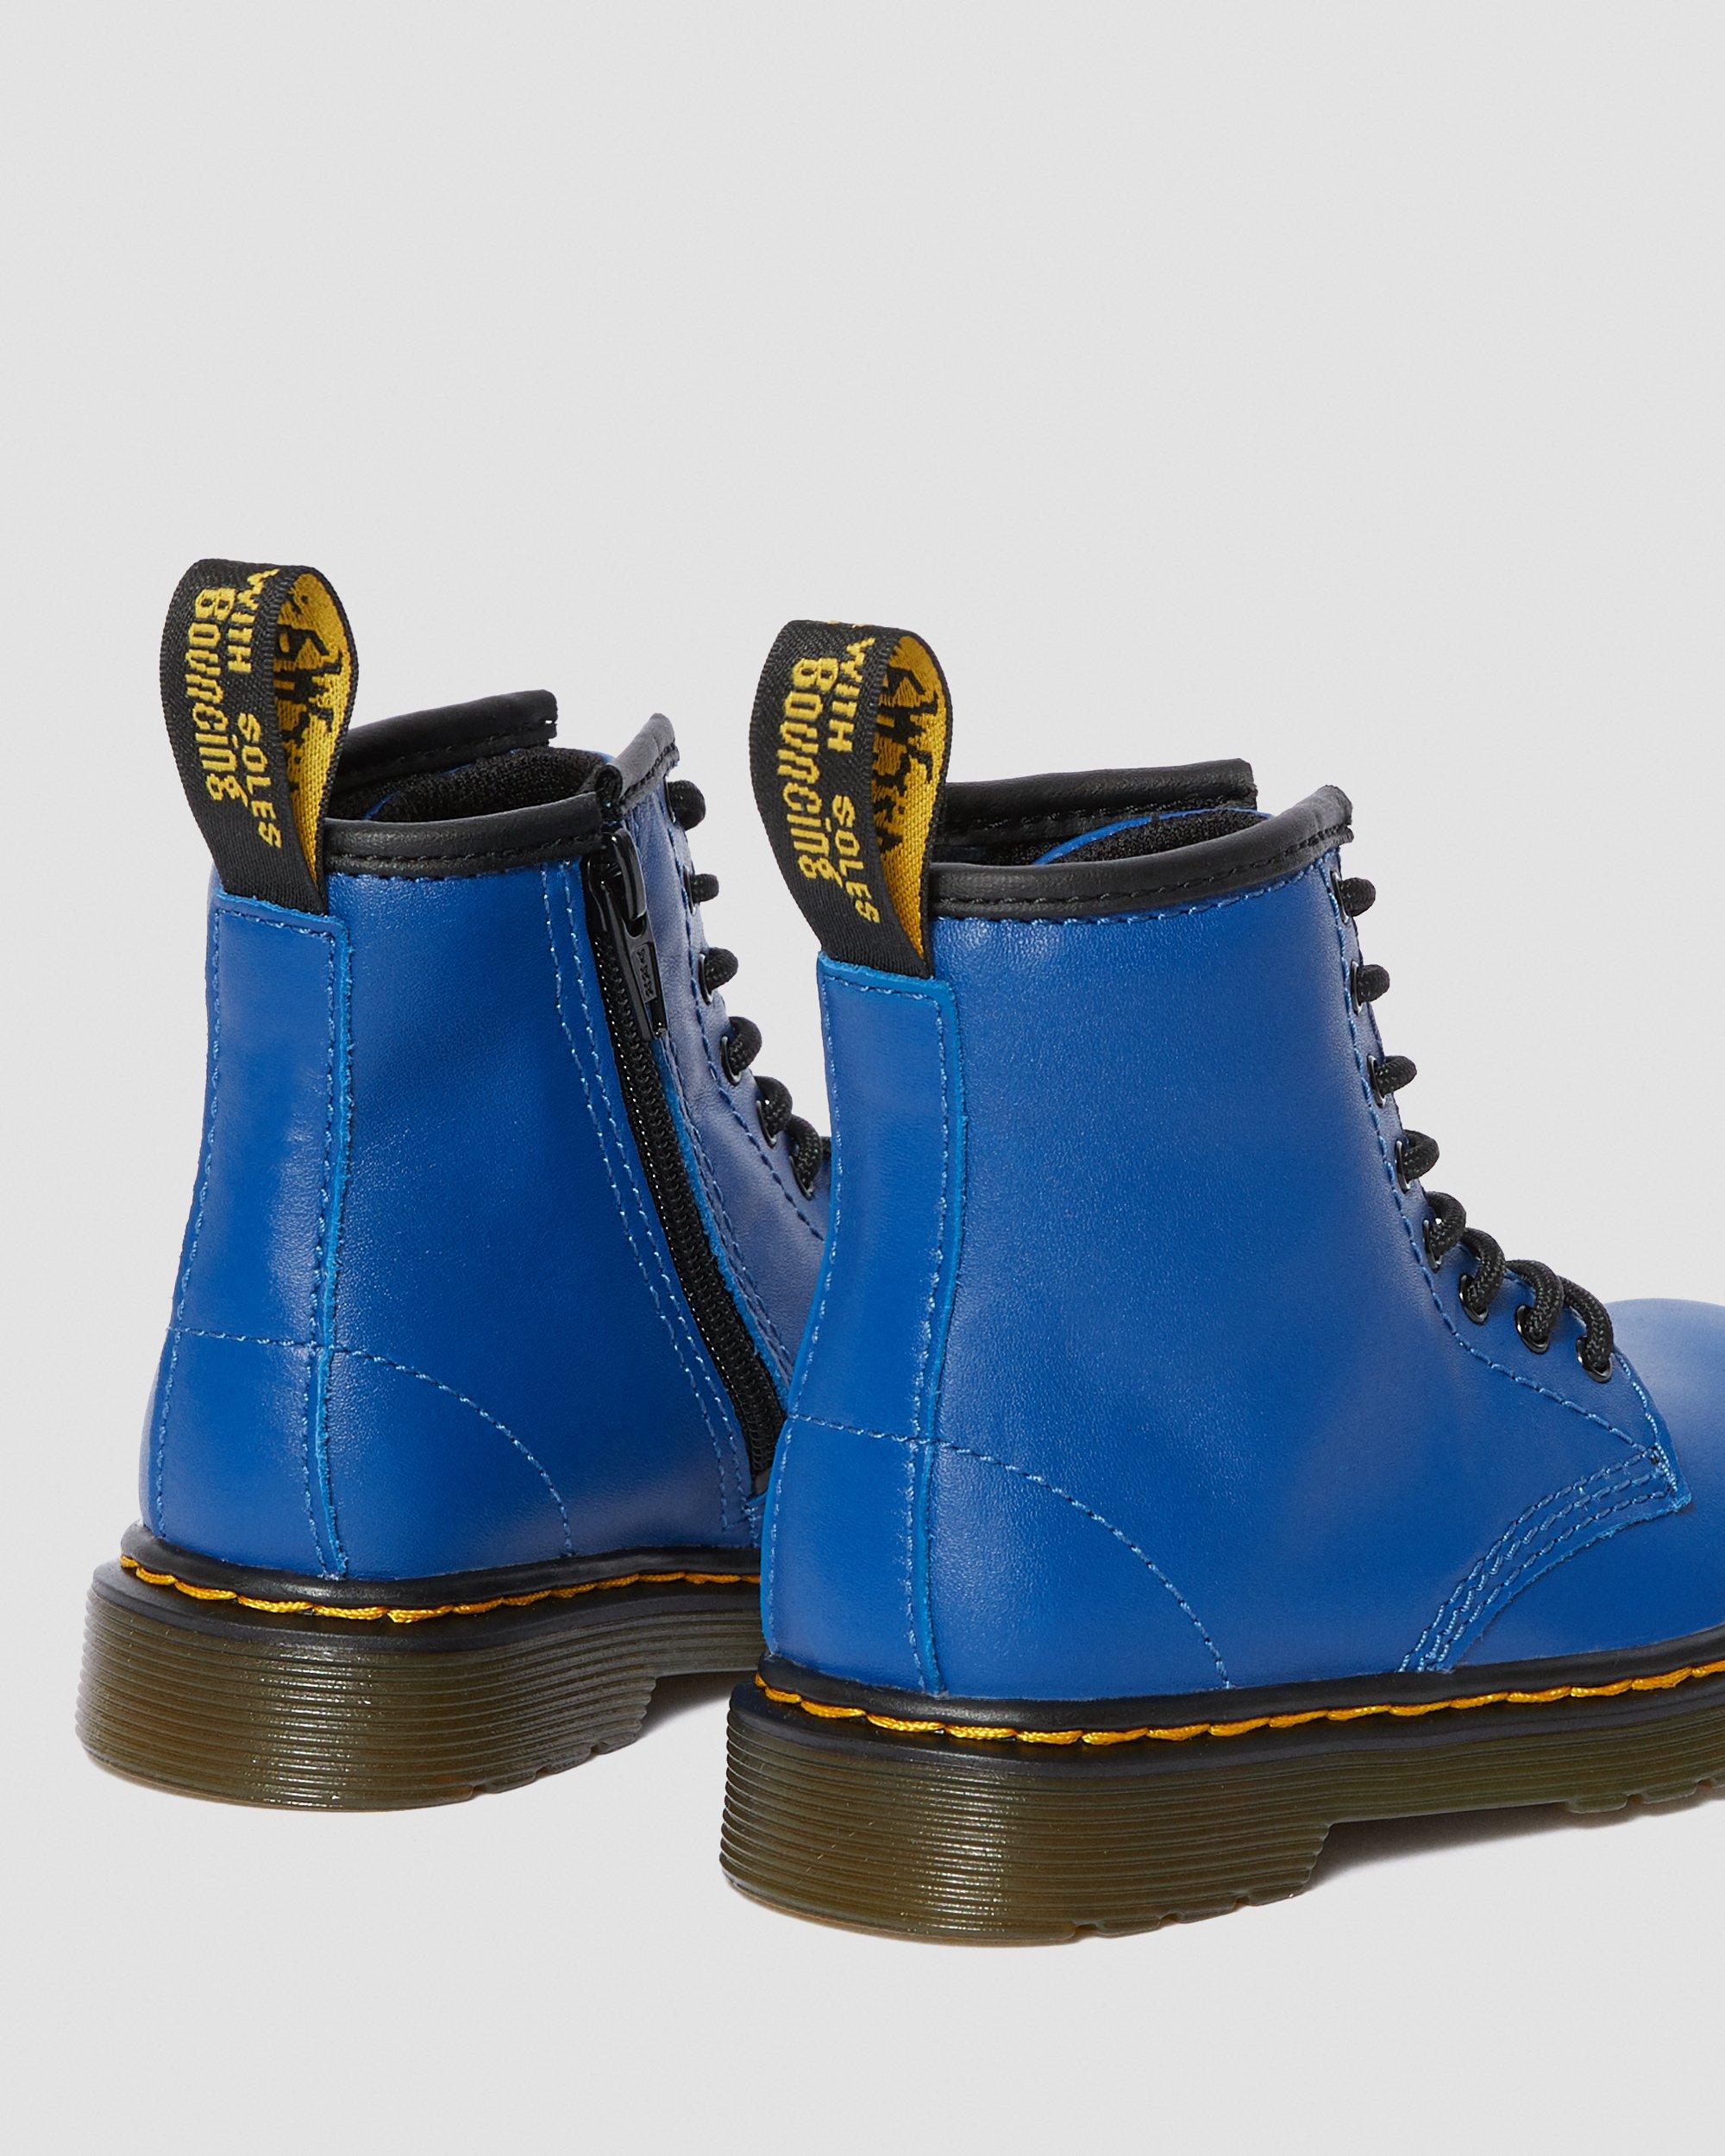 Toddler 1460 Leather Lace Up Boots in Blue